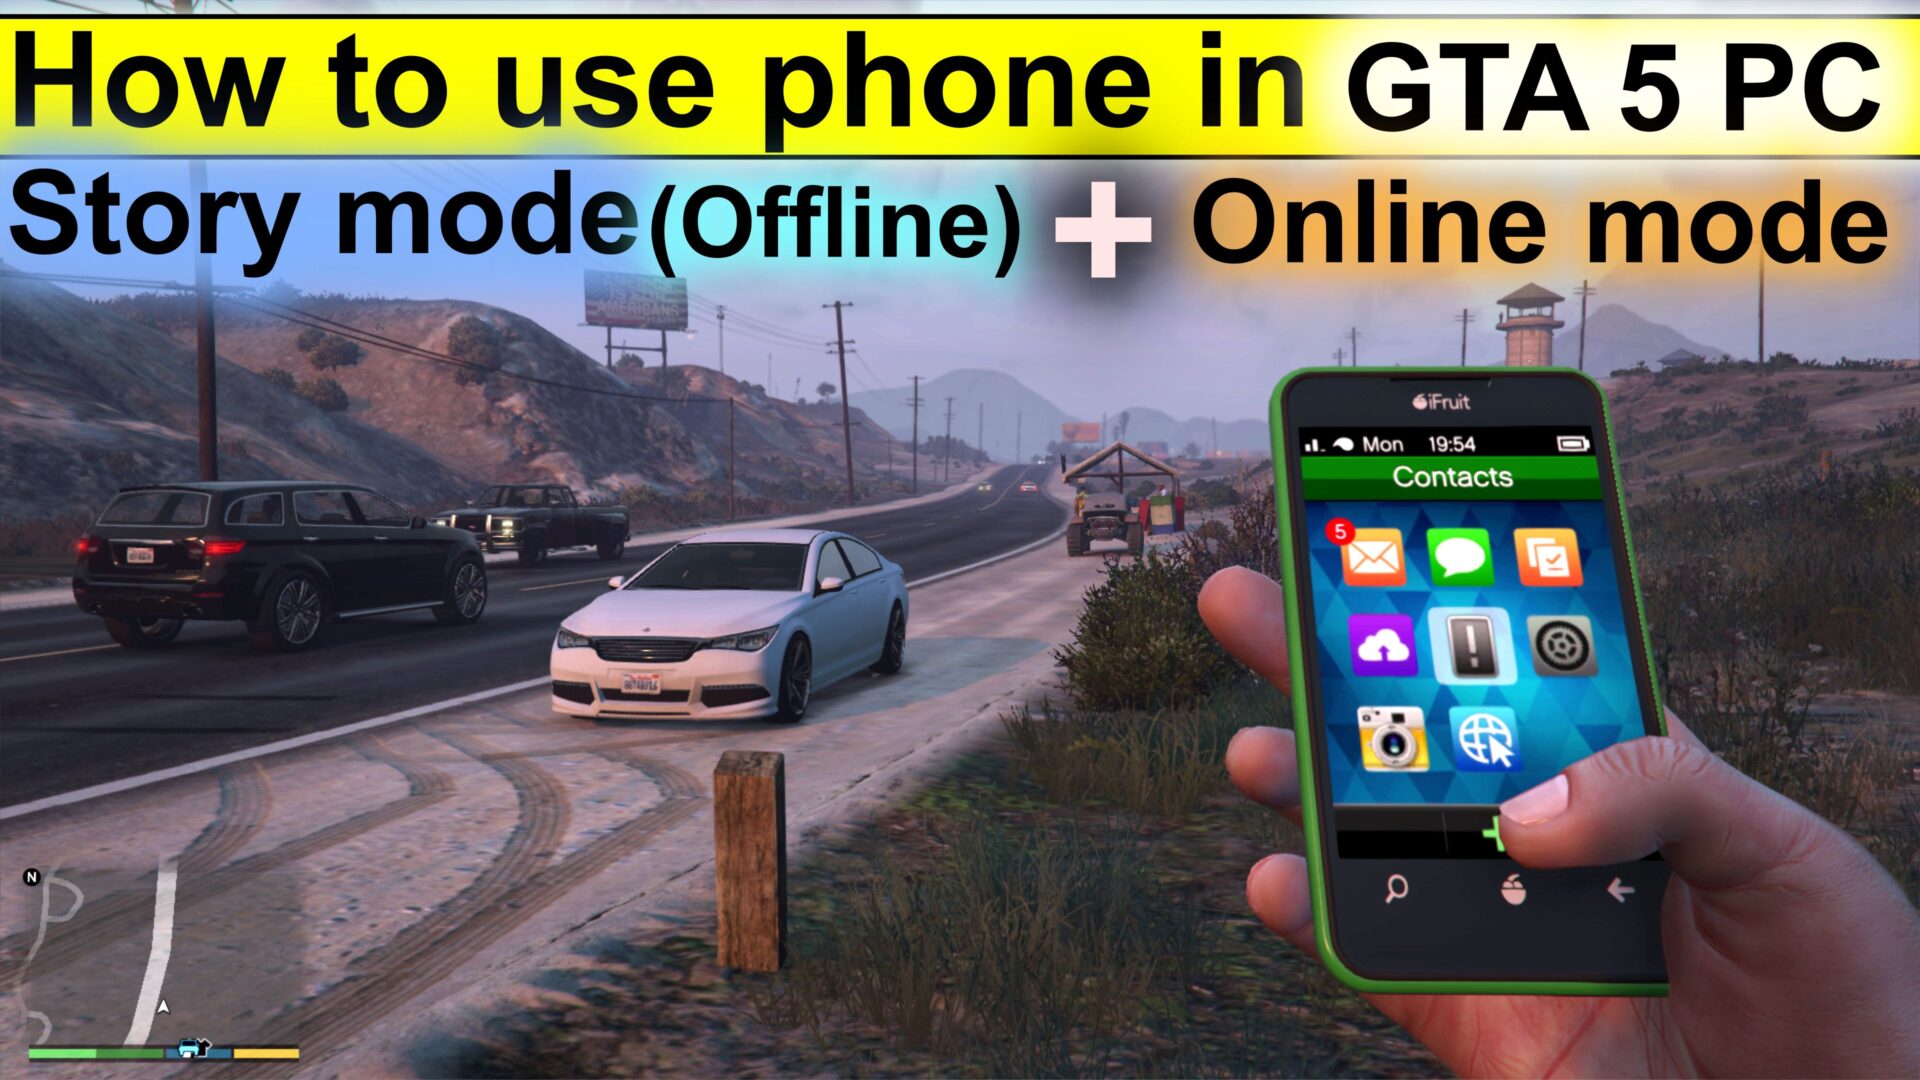 In GTA 5 PC, How to use Phone - Full Controls